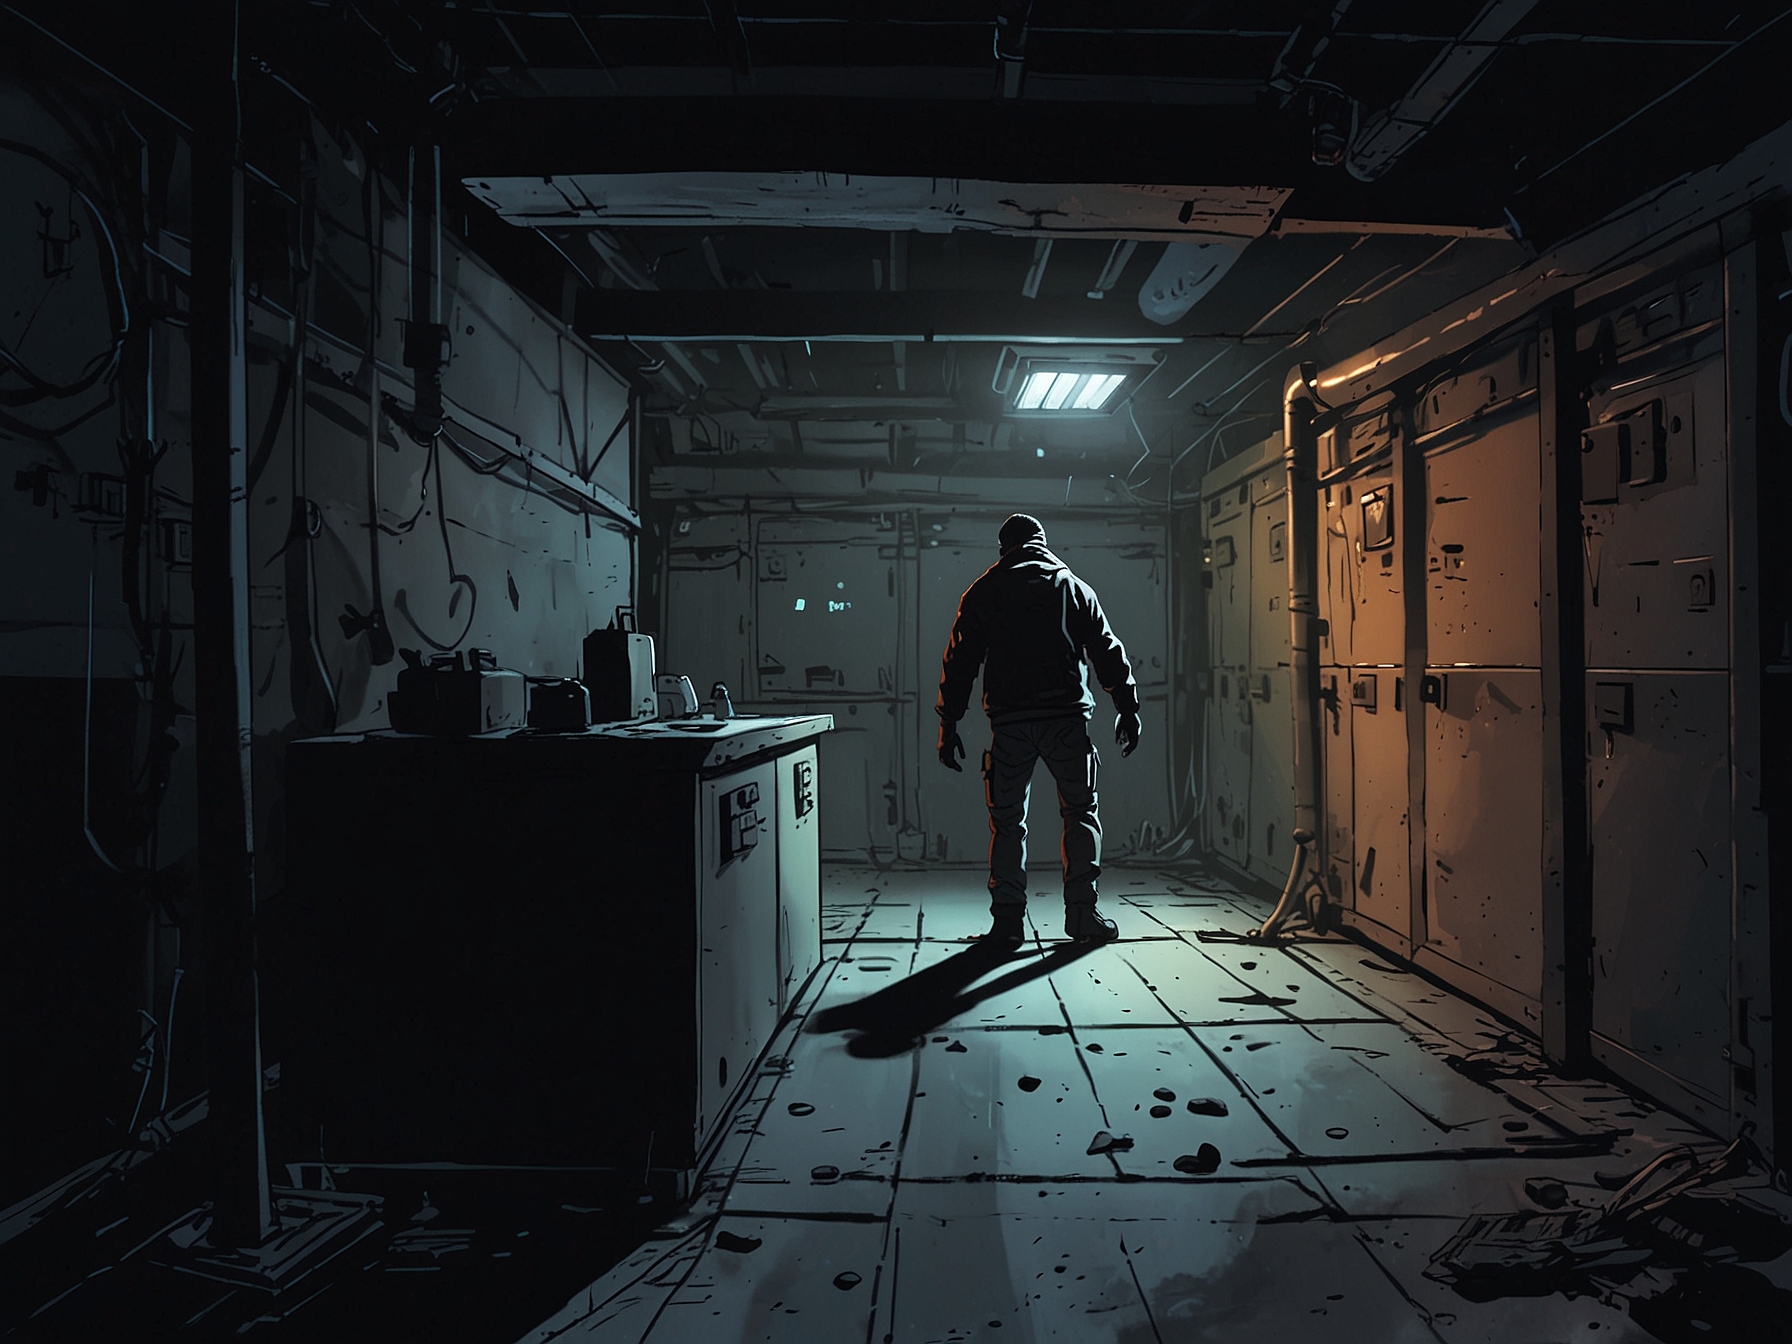 A tense scene depicting the player in a crawl space, their character hidden from Addair who is prowling the generator room, illustrating the high-stakes stealth required.